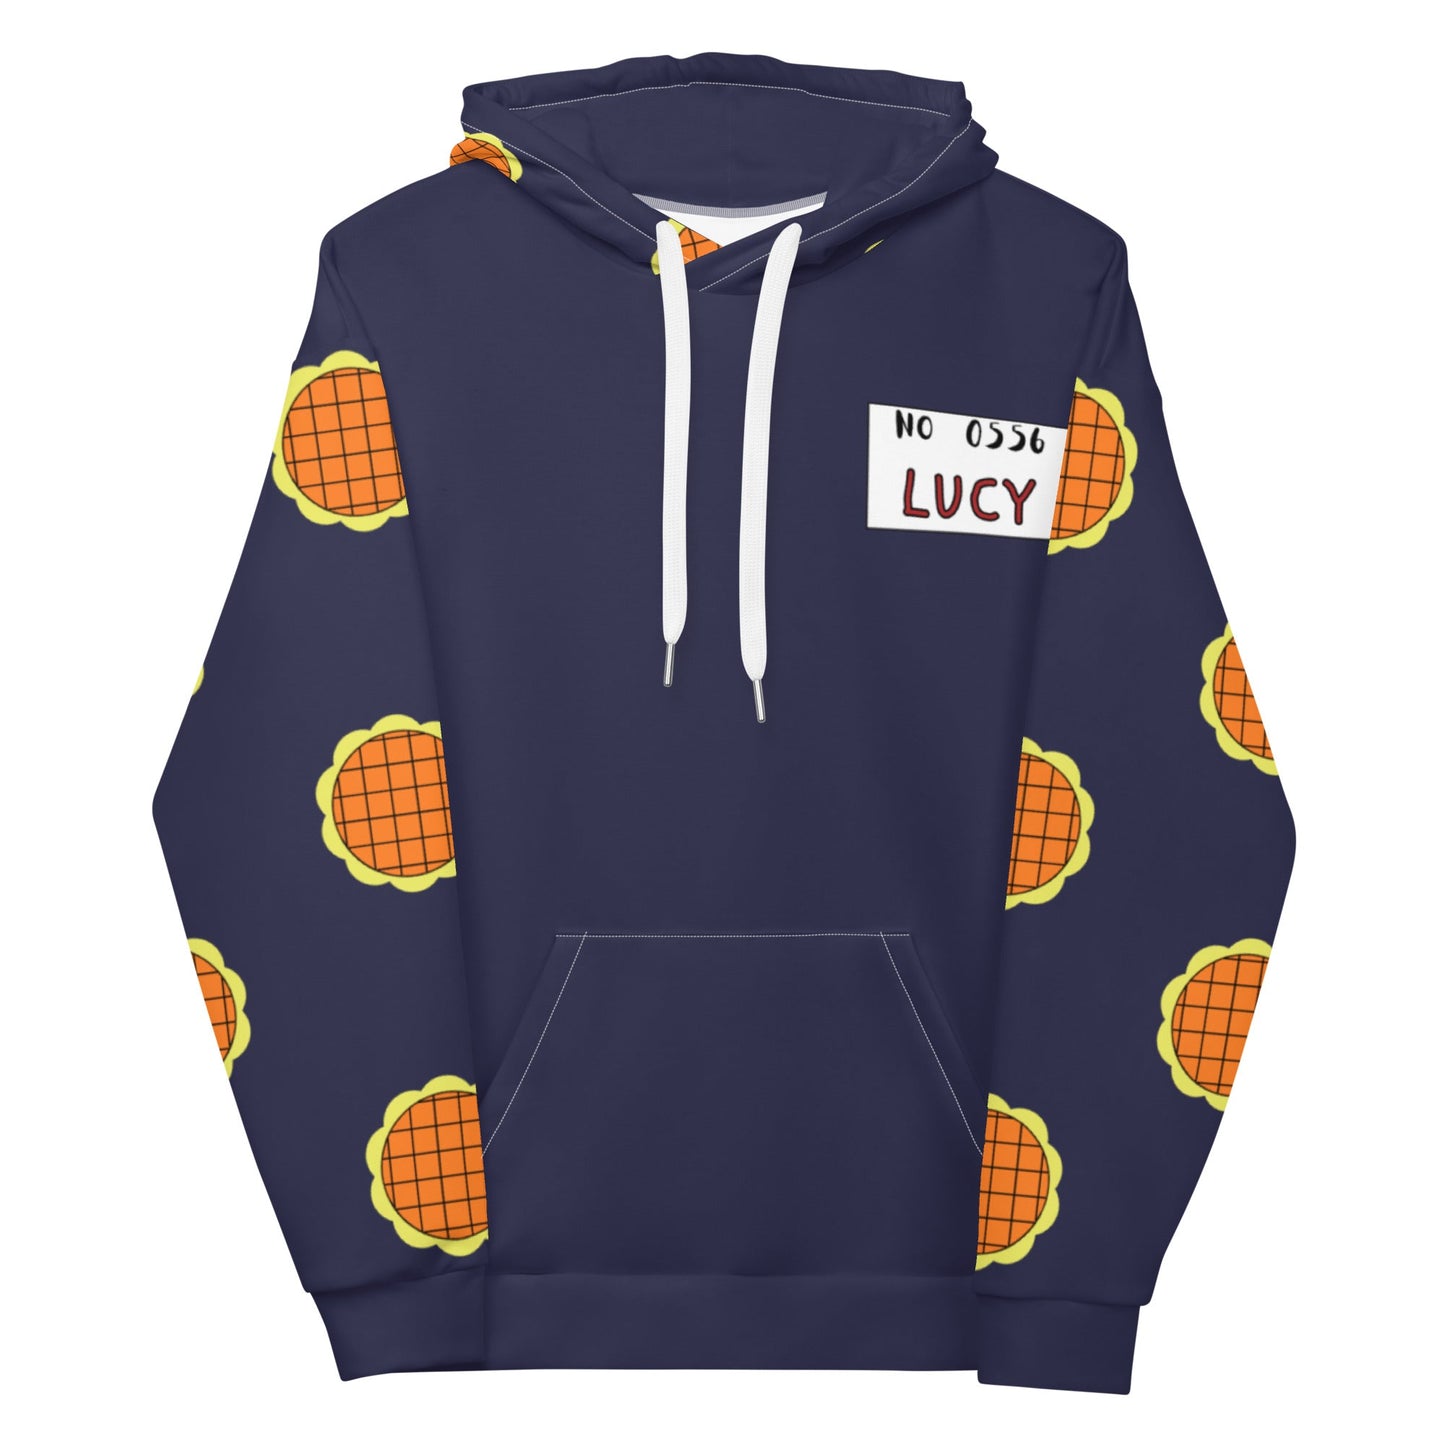 Lucy Ruffy Recycelter Unisex Anime Hoodie